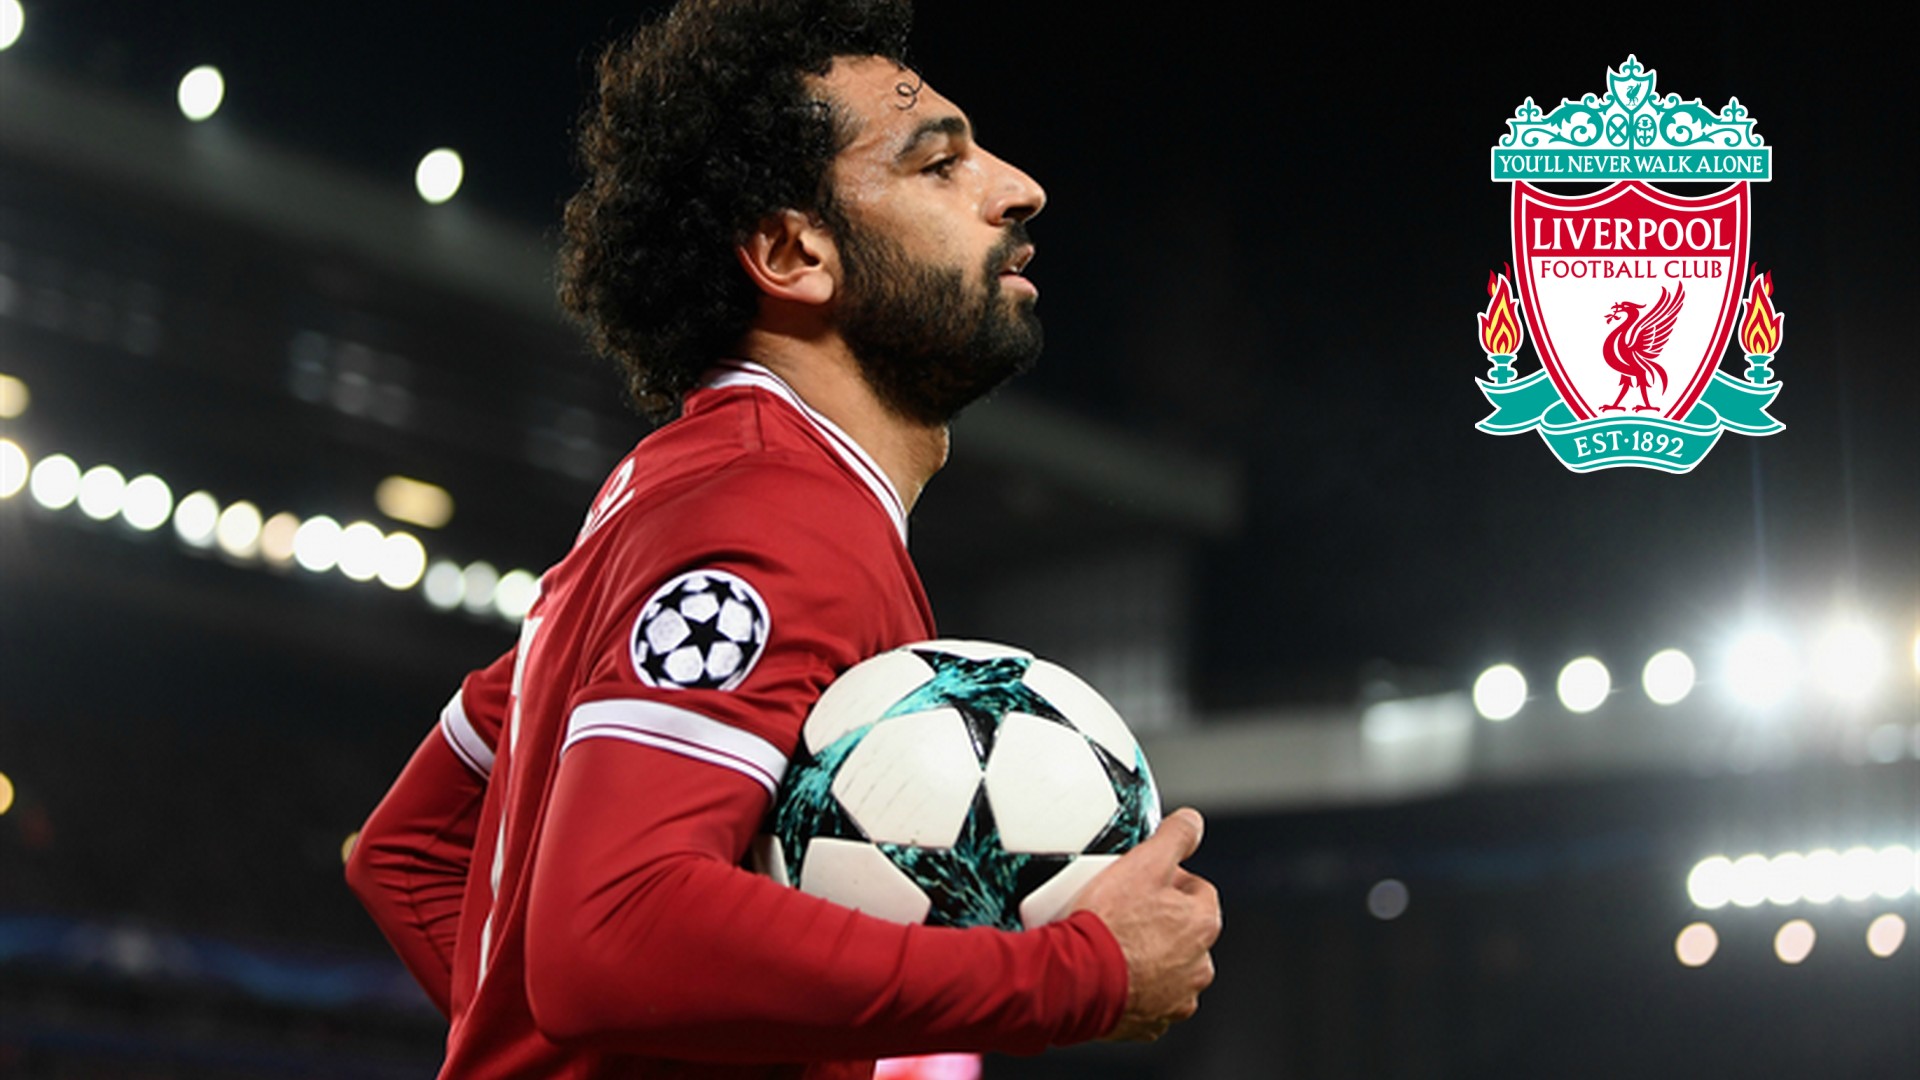 Wallpaper Liverpool Mohamed Salah HD With Resolution 1920X1080 pixel. You can make this wallpaper for your Desktop Computer Backgrounds, Mac Wallpapers, Android Lock screen or iPhone Screensavers